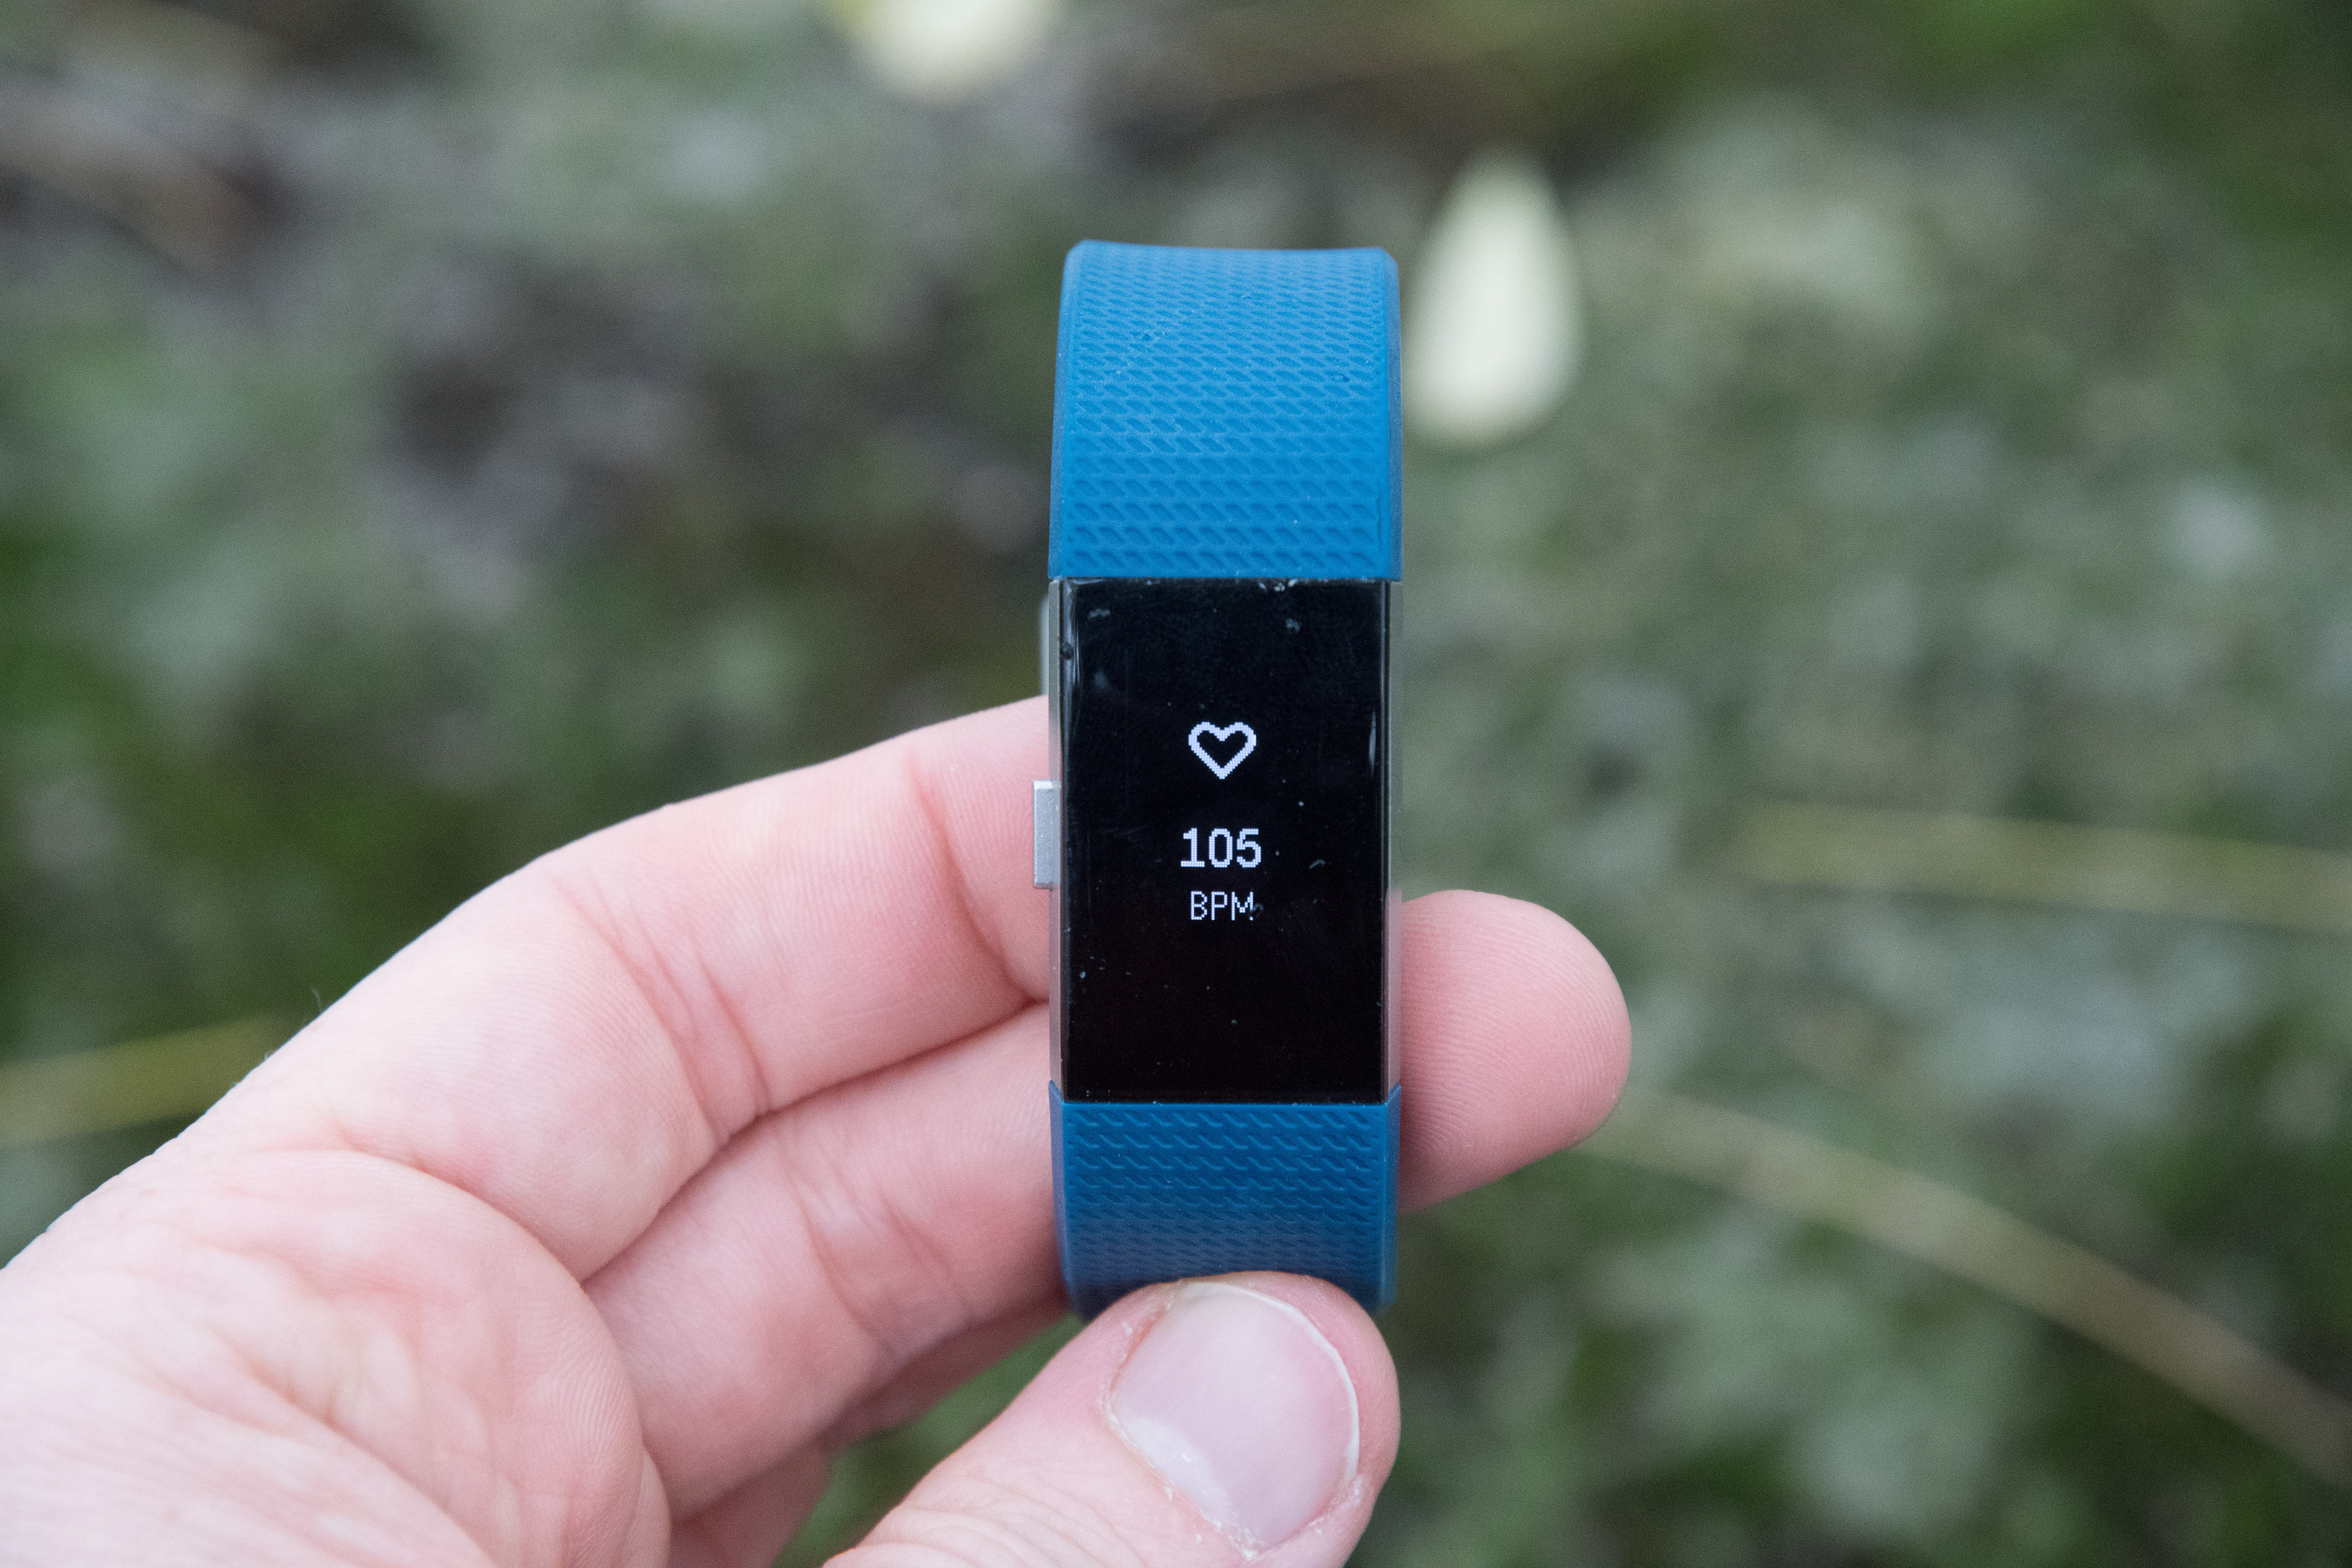 download fitbit charge 2